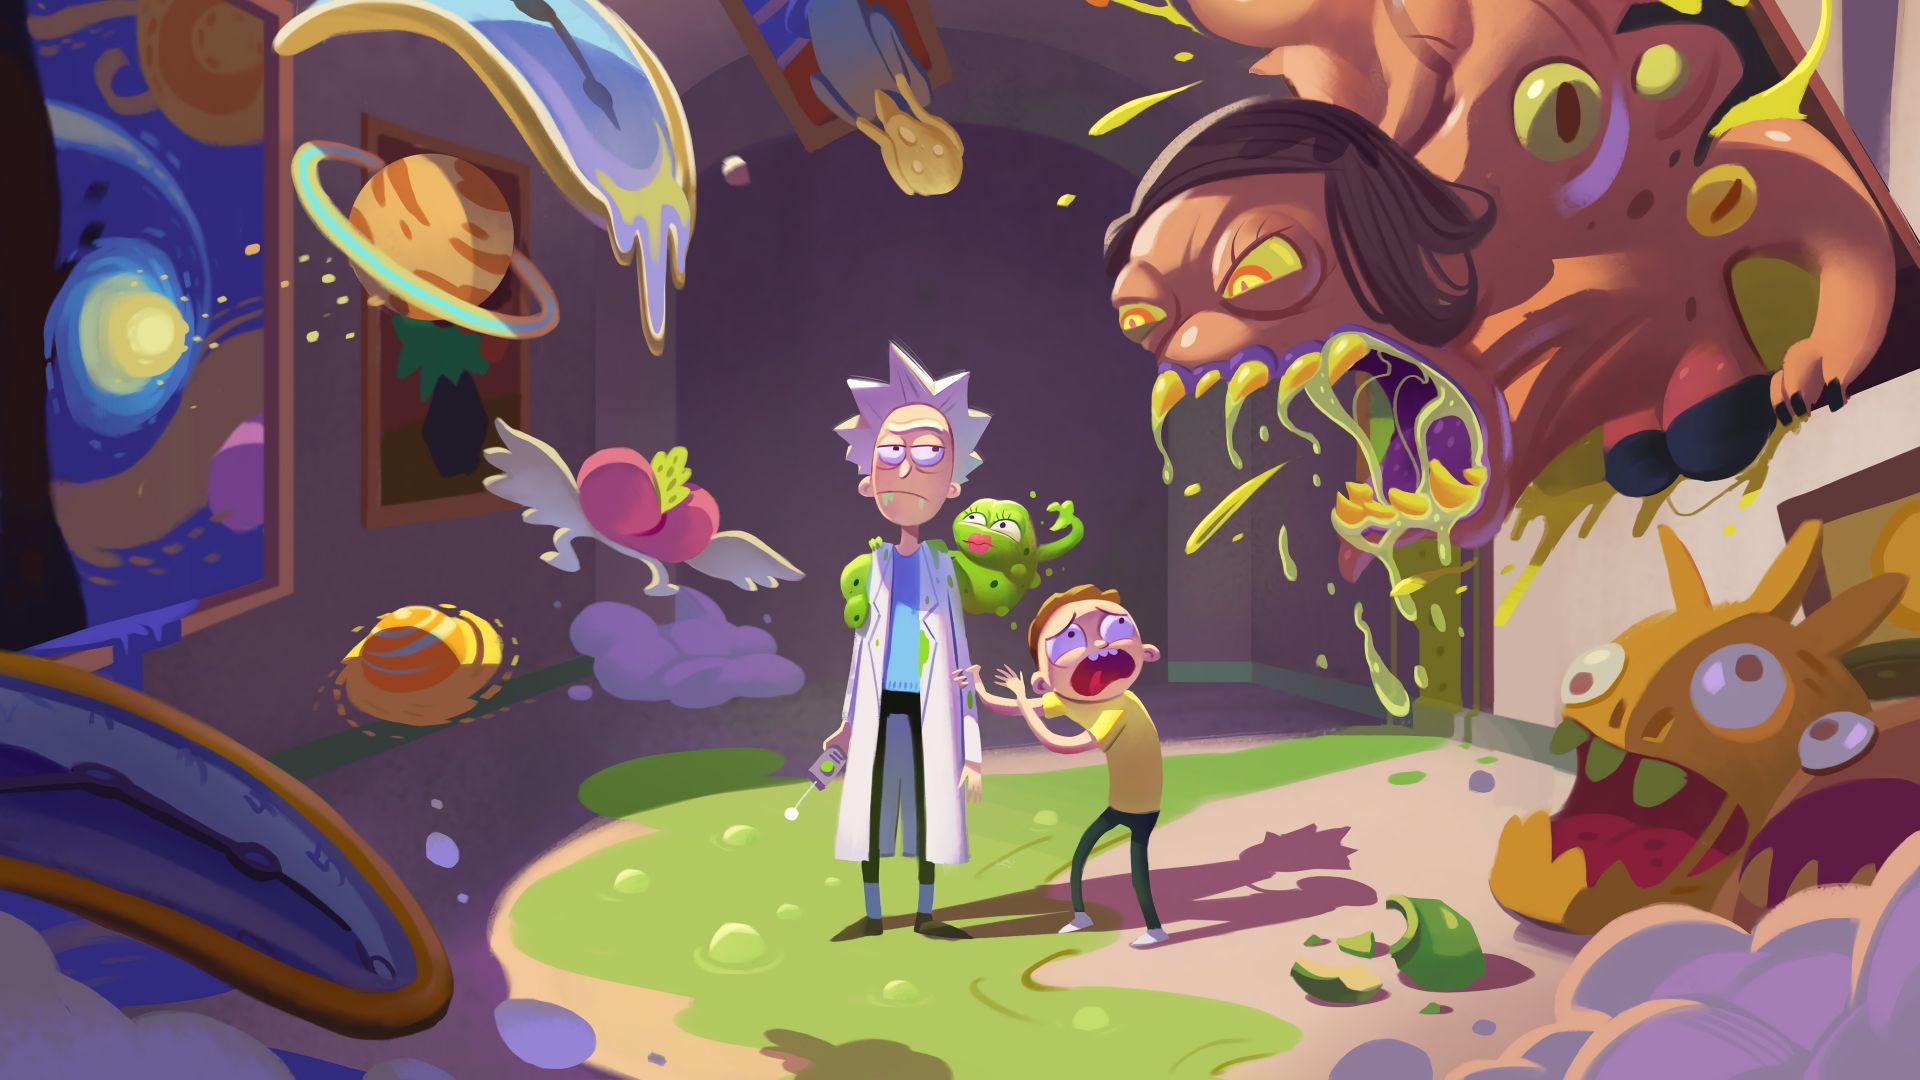 Desktop wallpaper rick and morty, season famous tv series, HD image, picture, background, 3a8464